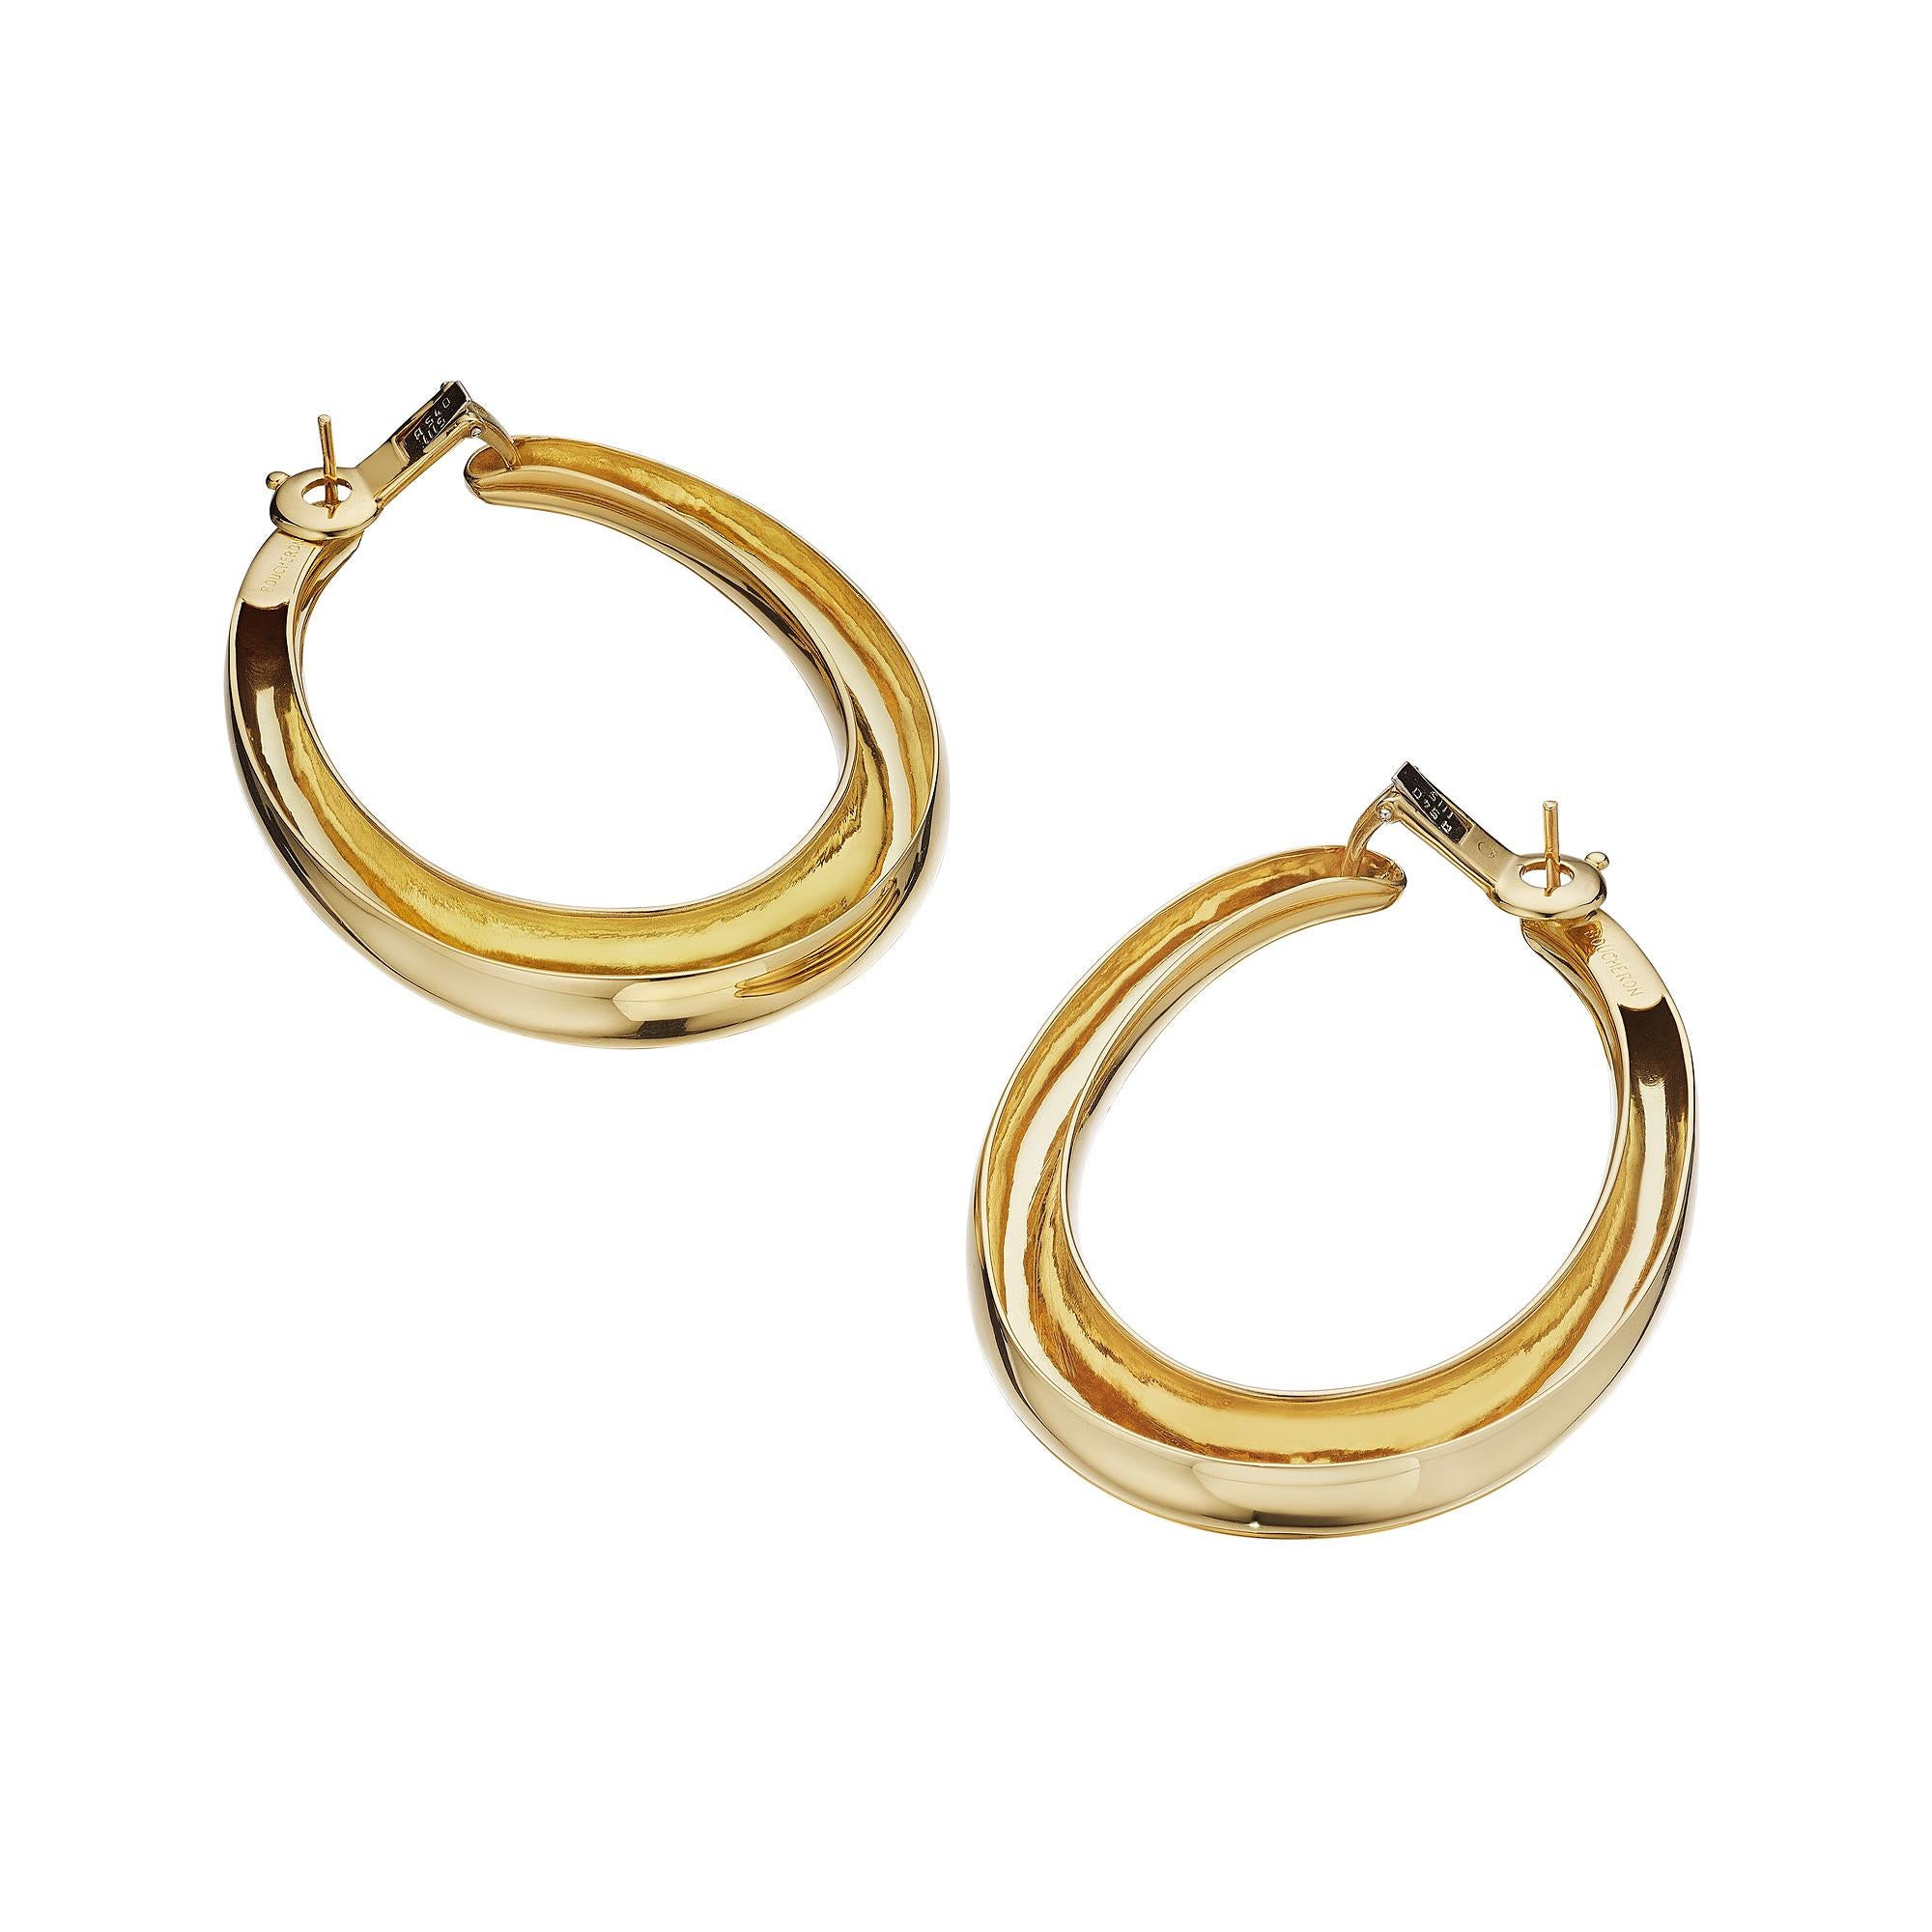 These Boucheron Paris modernist earrings will throw you for a loop.  With their large scale oval drop yellow gold tubular loops, these stylish hoop earrings are a collectible wardrobe statement piece.  Signed Boucheron.  Circa 1975-80.  Post with